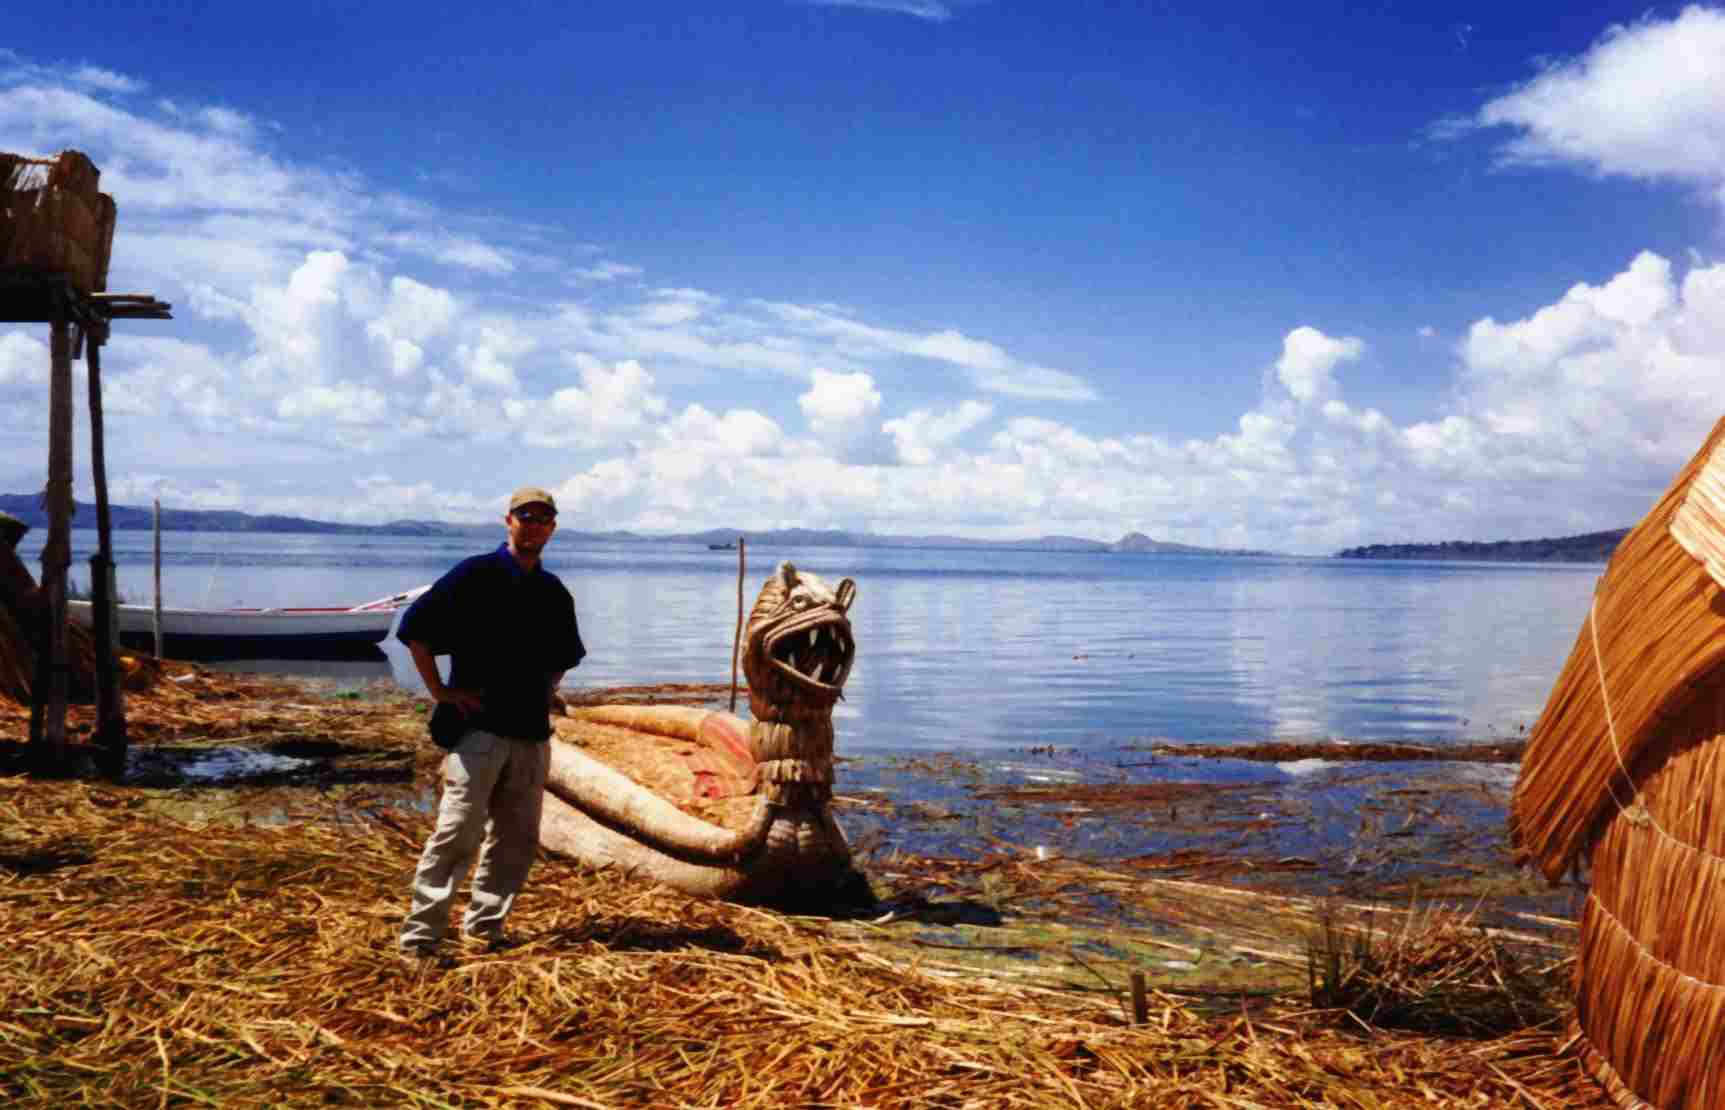 The floating Islands, Lake Titicaca